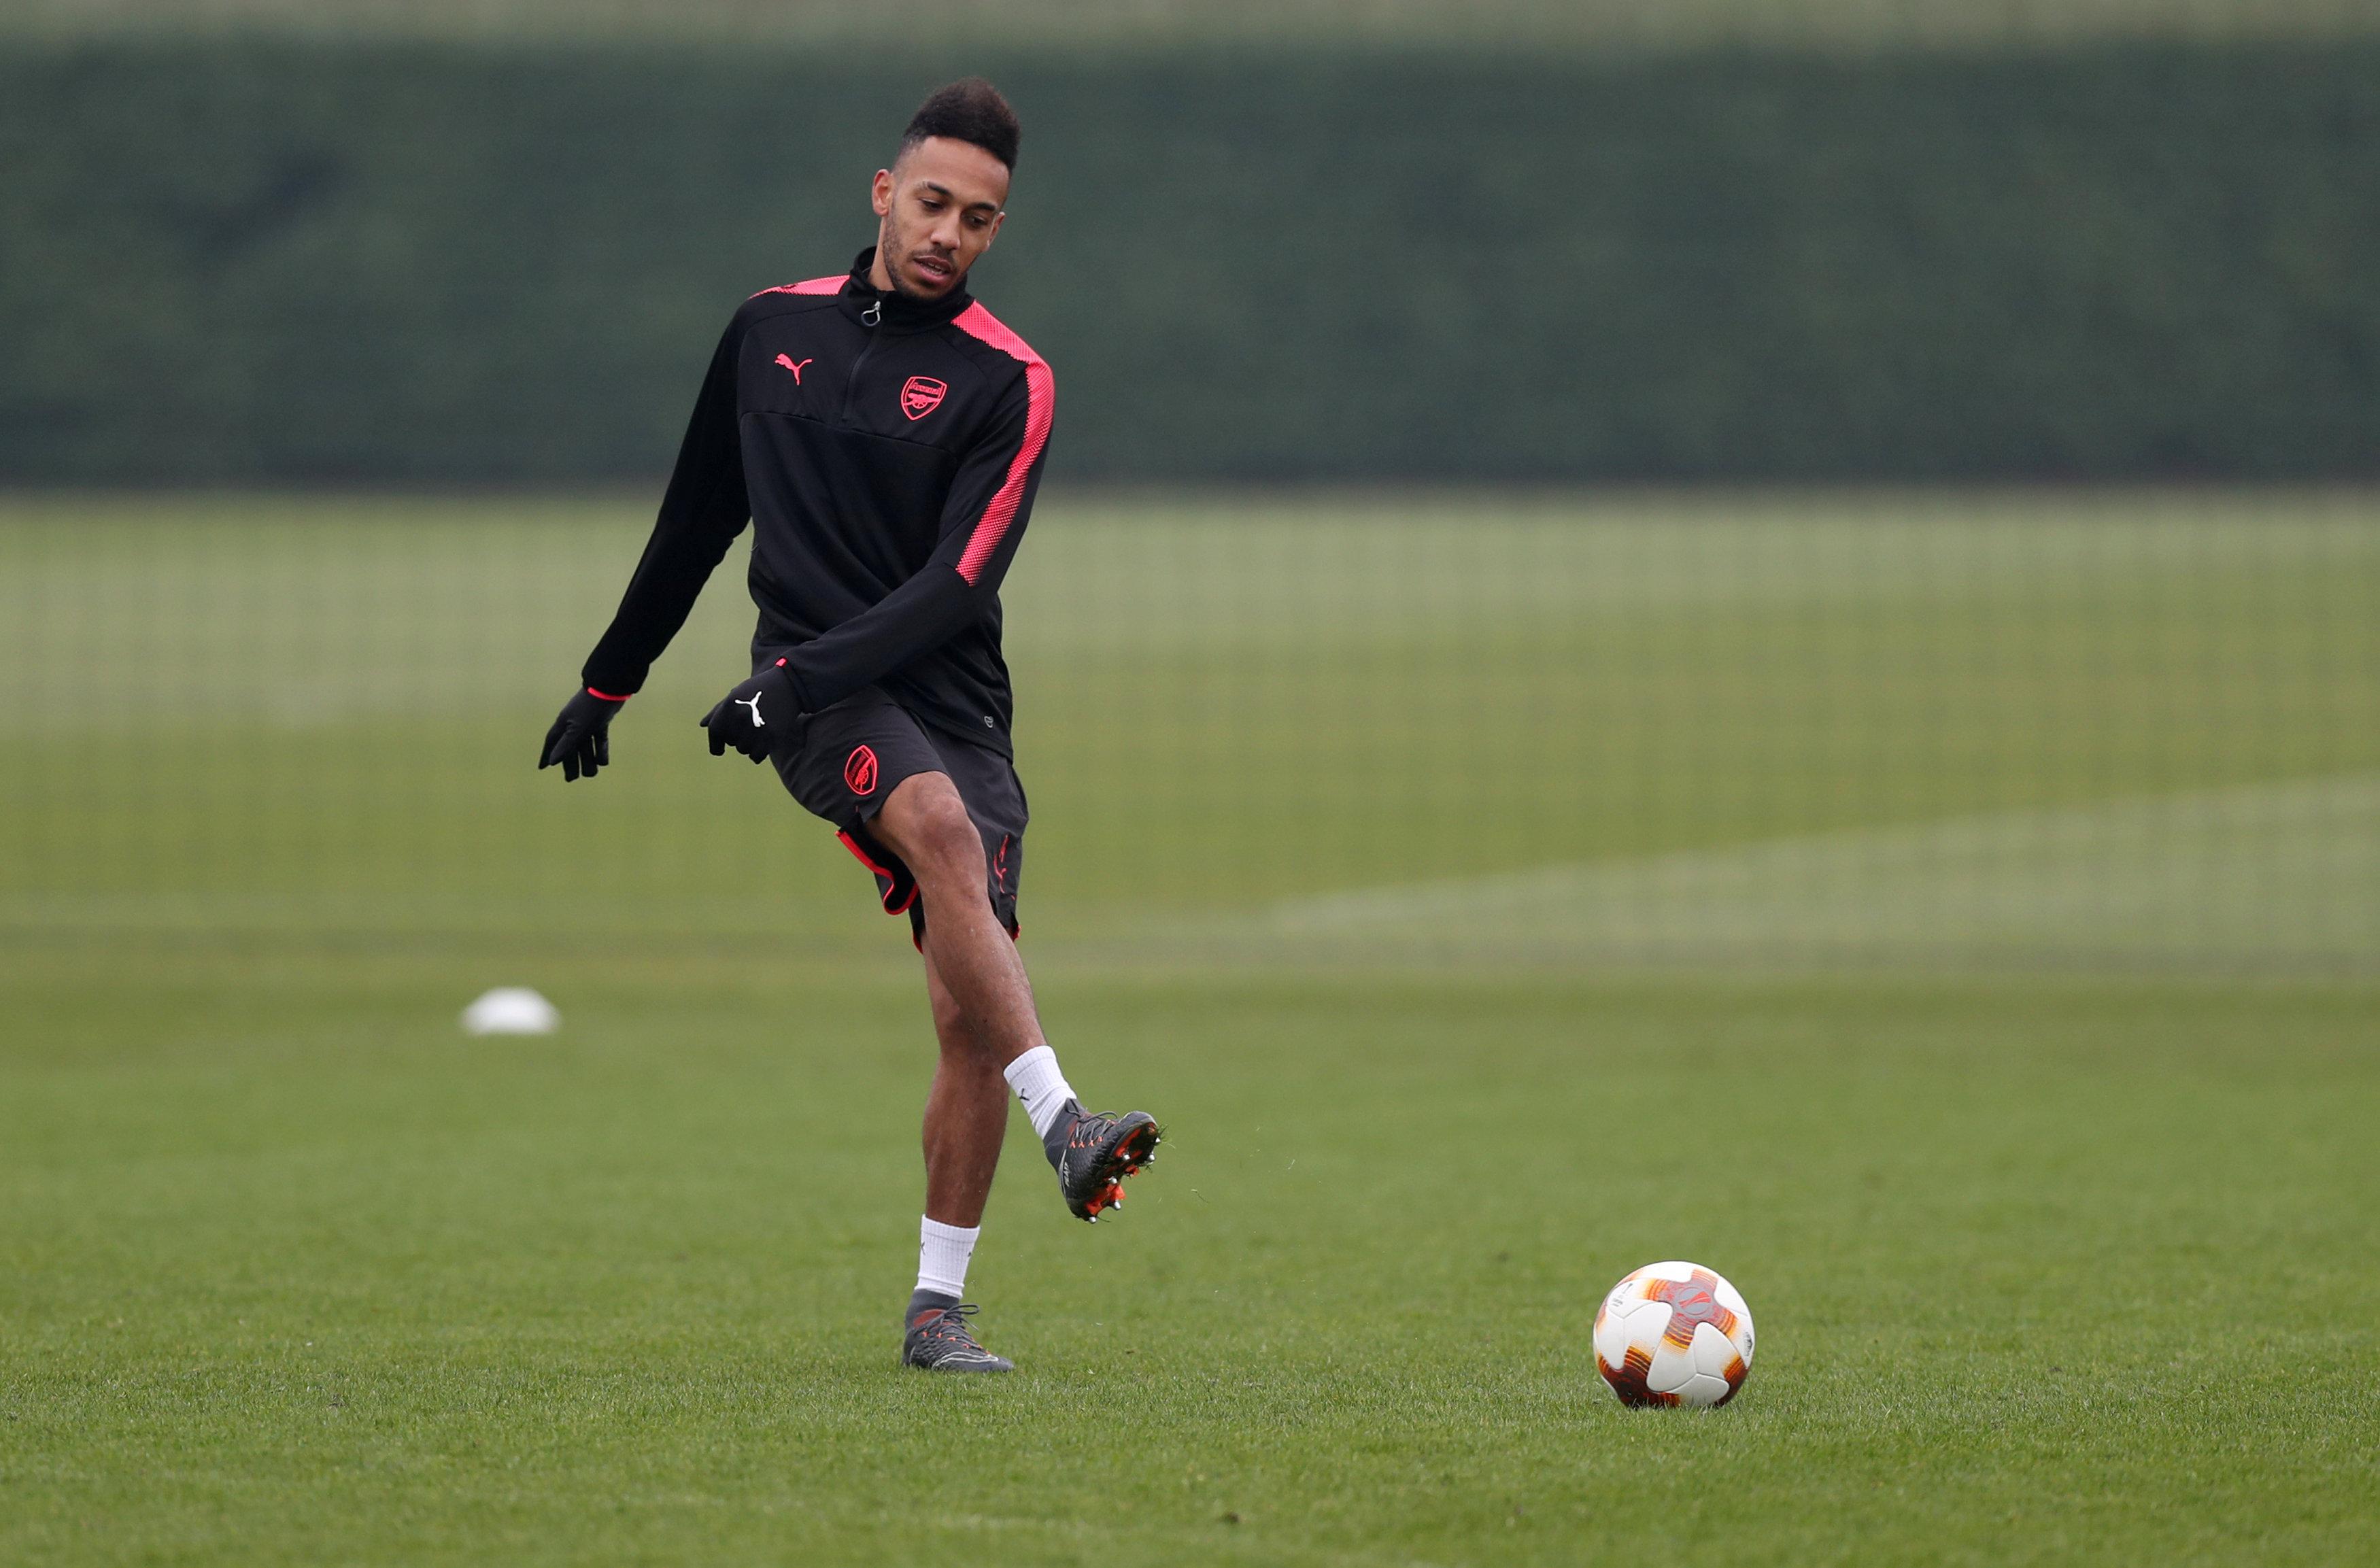  Aubameyang was pictured training earlier today